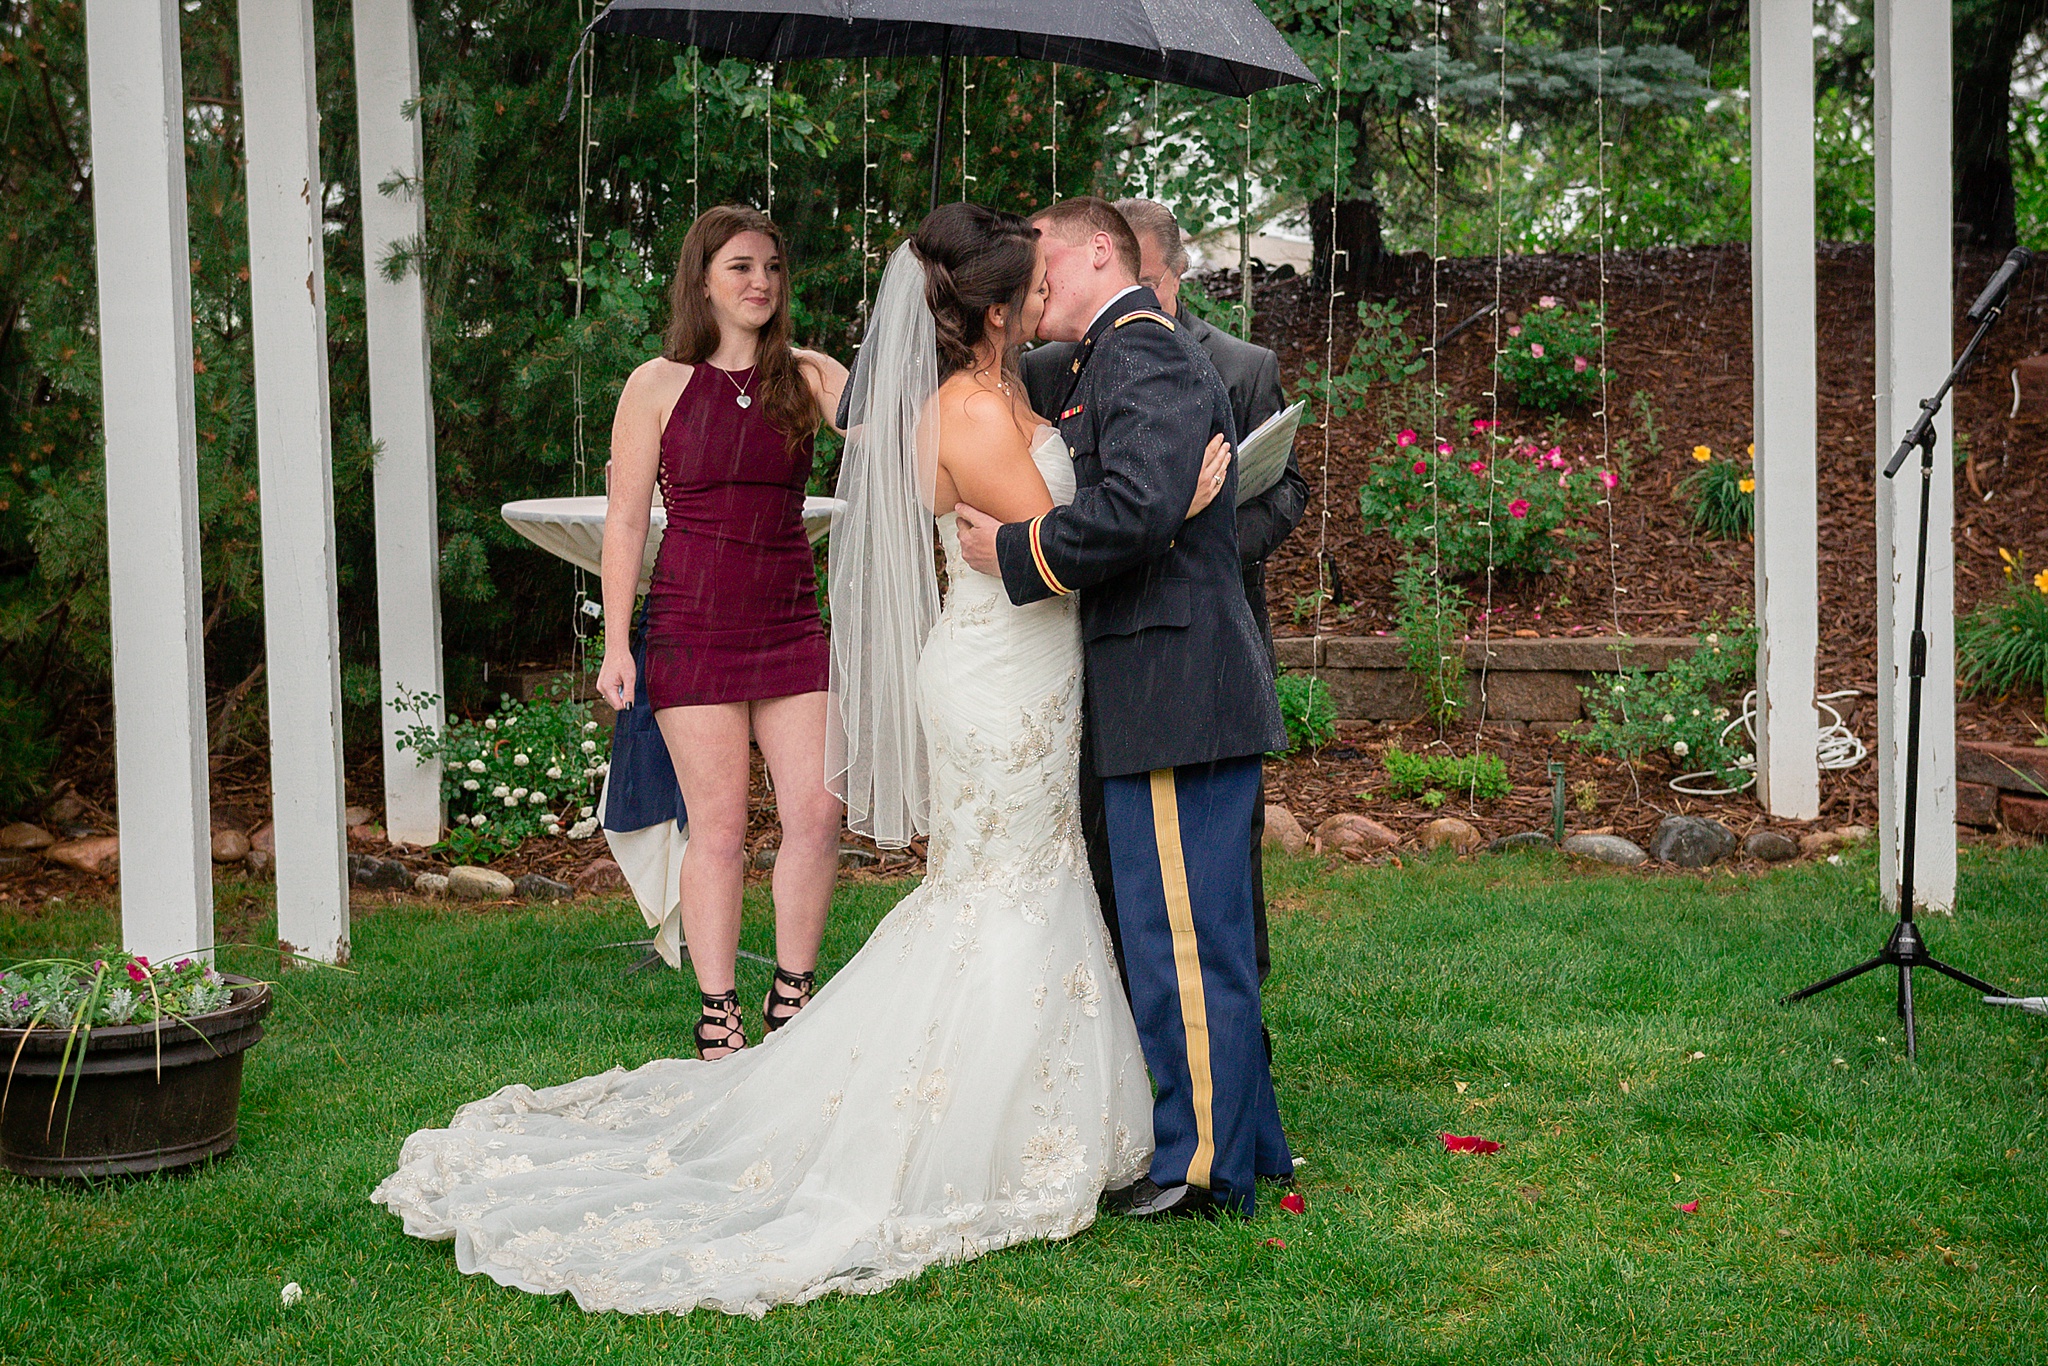 Bride & Groom’s first kiss during a rainy summer wedding. Tania & Chris' Denver Wedding at the Wedgewood Ken Caryl by Colorado Wedding Photography, Jennifer Garza. Colorado Wedding Photographer, Colorado Wedding Photography, Denver Wedding Photographer, Denver Wedding Photography, US Marine Corp Wedding, US Marine Corp, Military Wedding, US Marines, Wedgewood Weddings, Wedgewood Weddings Ken Caryl, Colorado Wedding, Denver Wedding, Wedding Photographer, Colorado Bride, Brides of Colorado